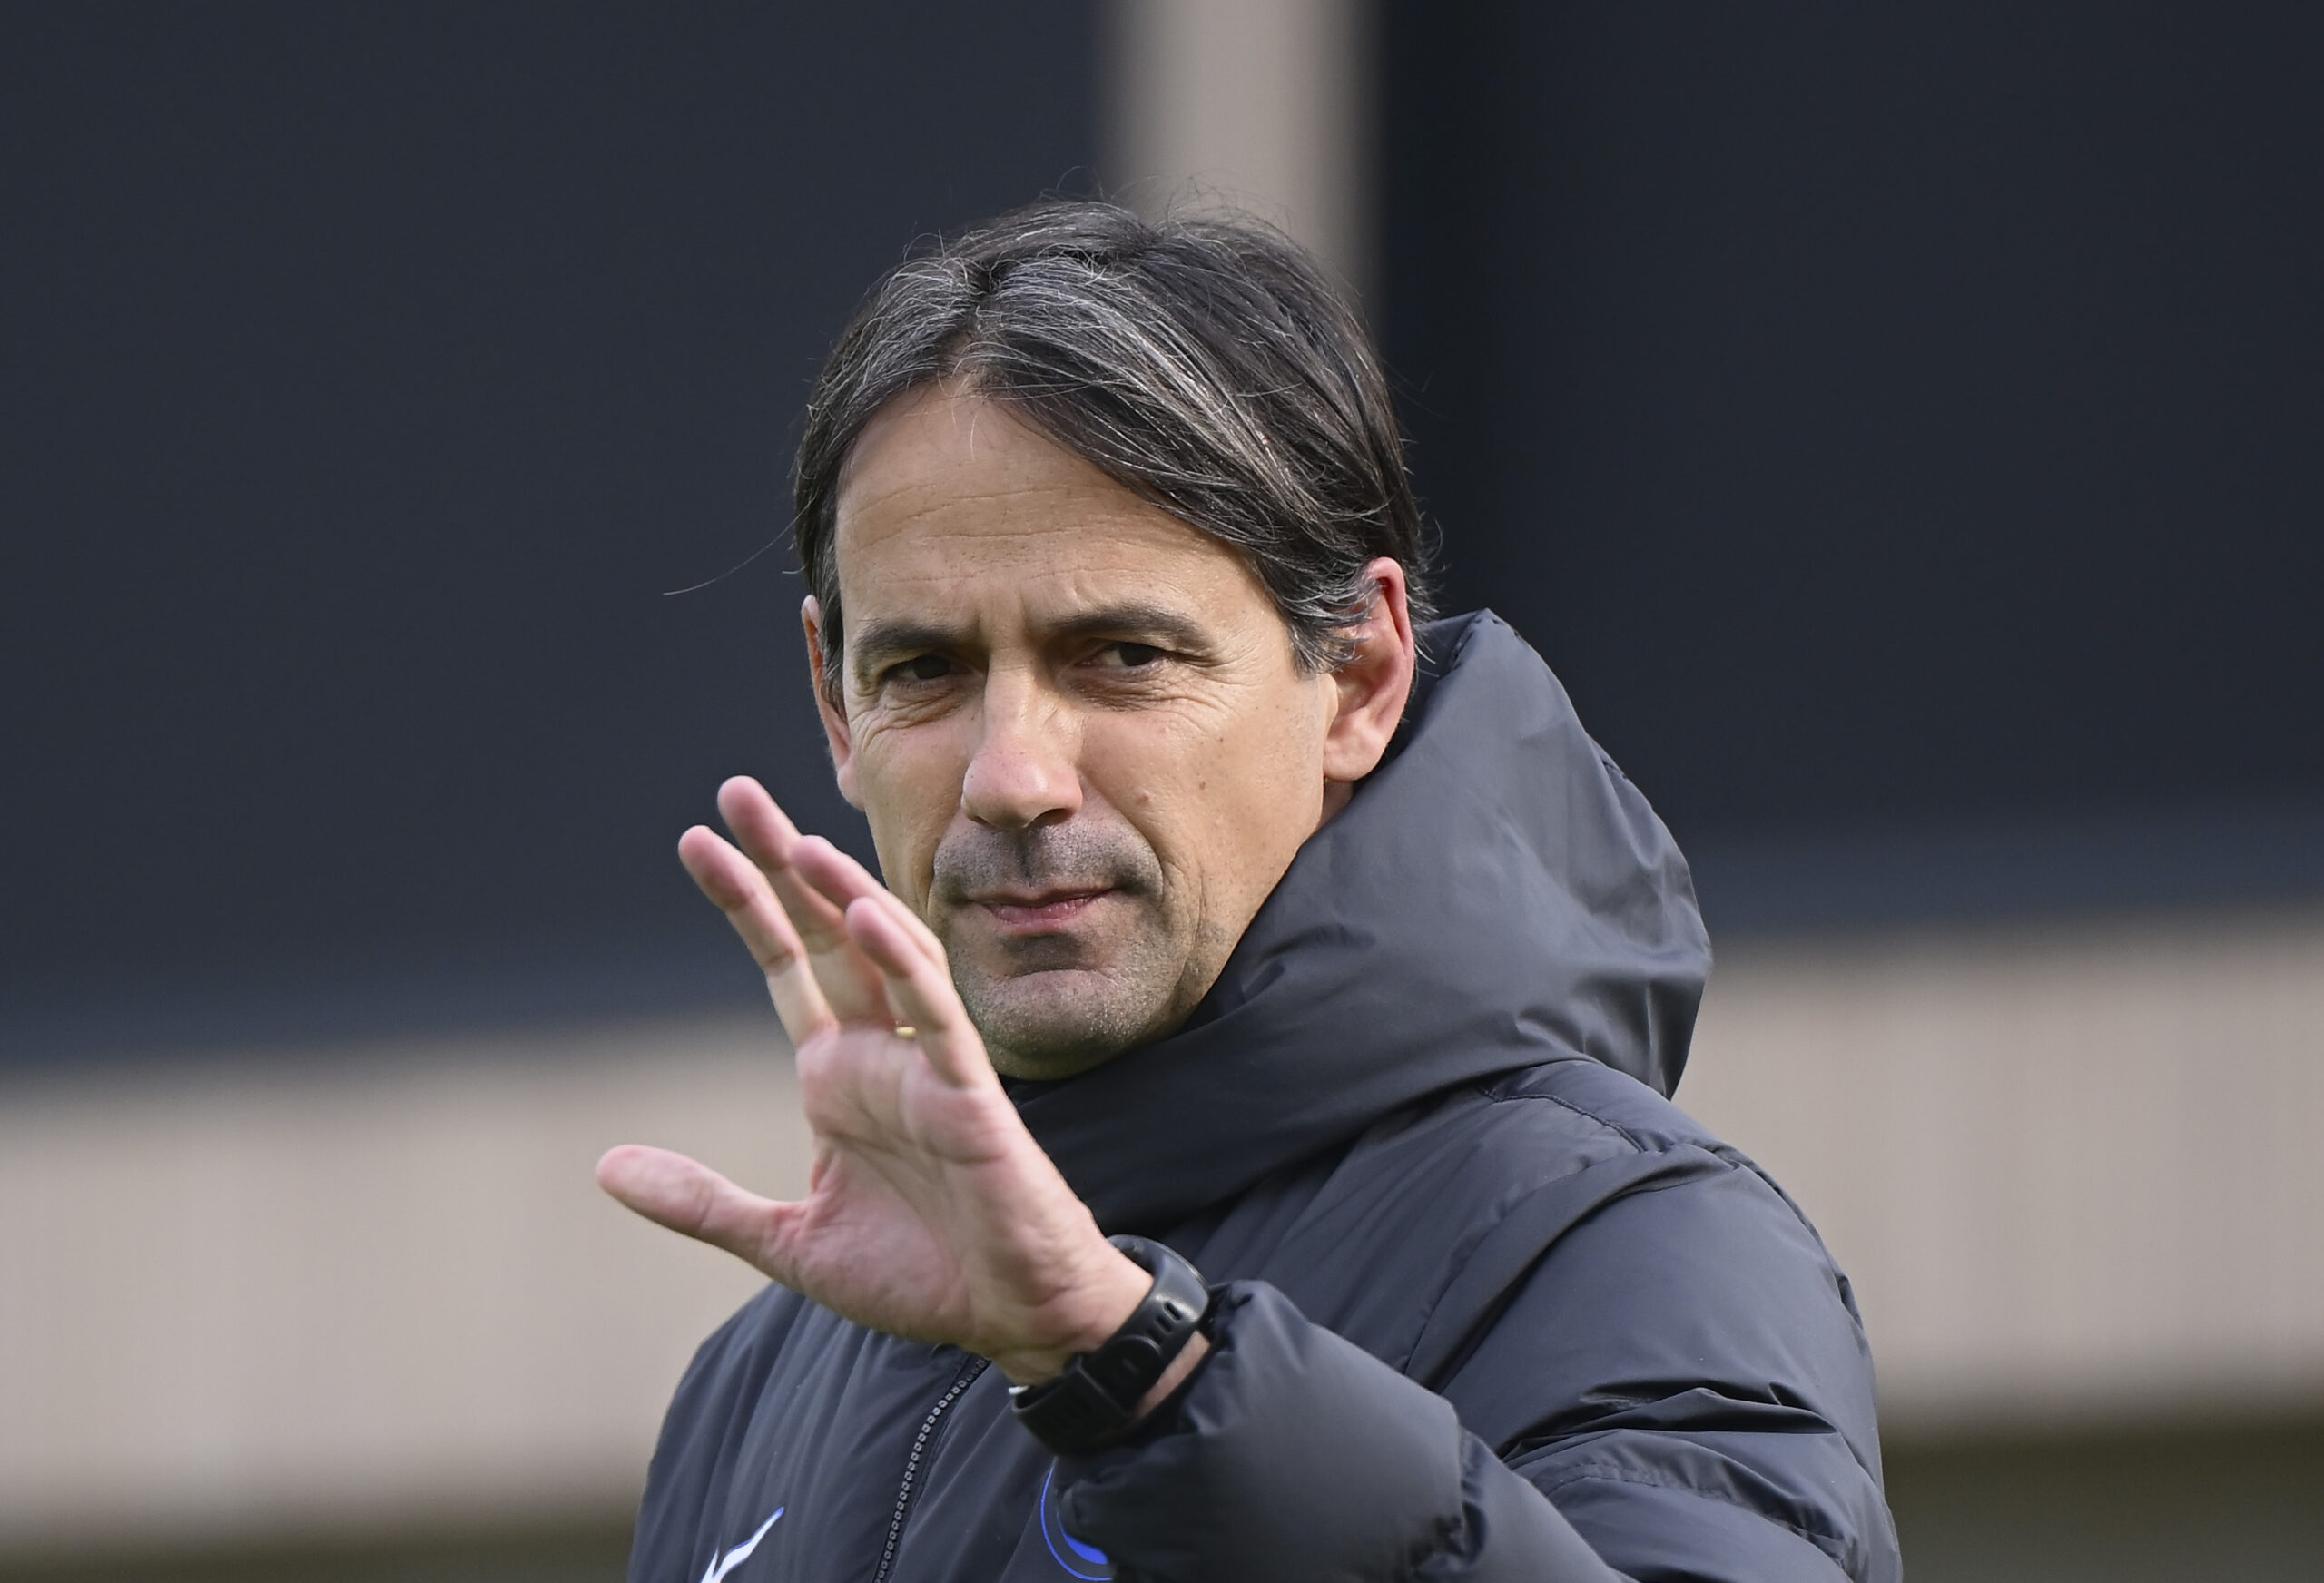 Inter and Simone Inzaghi are putting the finishing touches on a contract renewal that will see the coach commit to the team potentially until 2027.